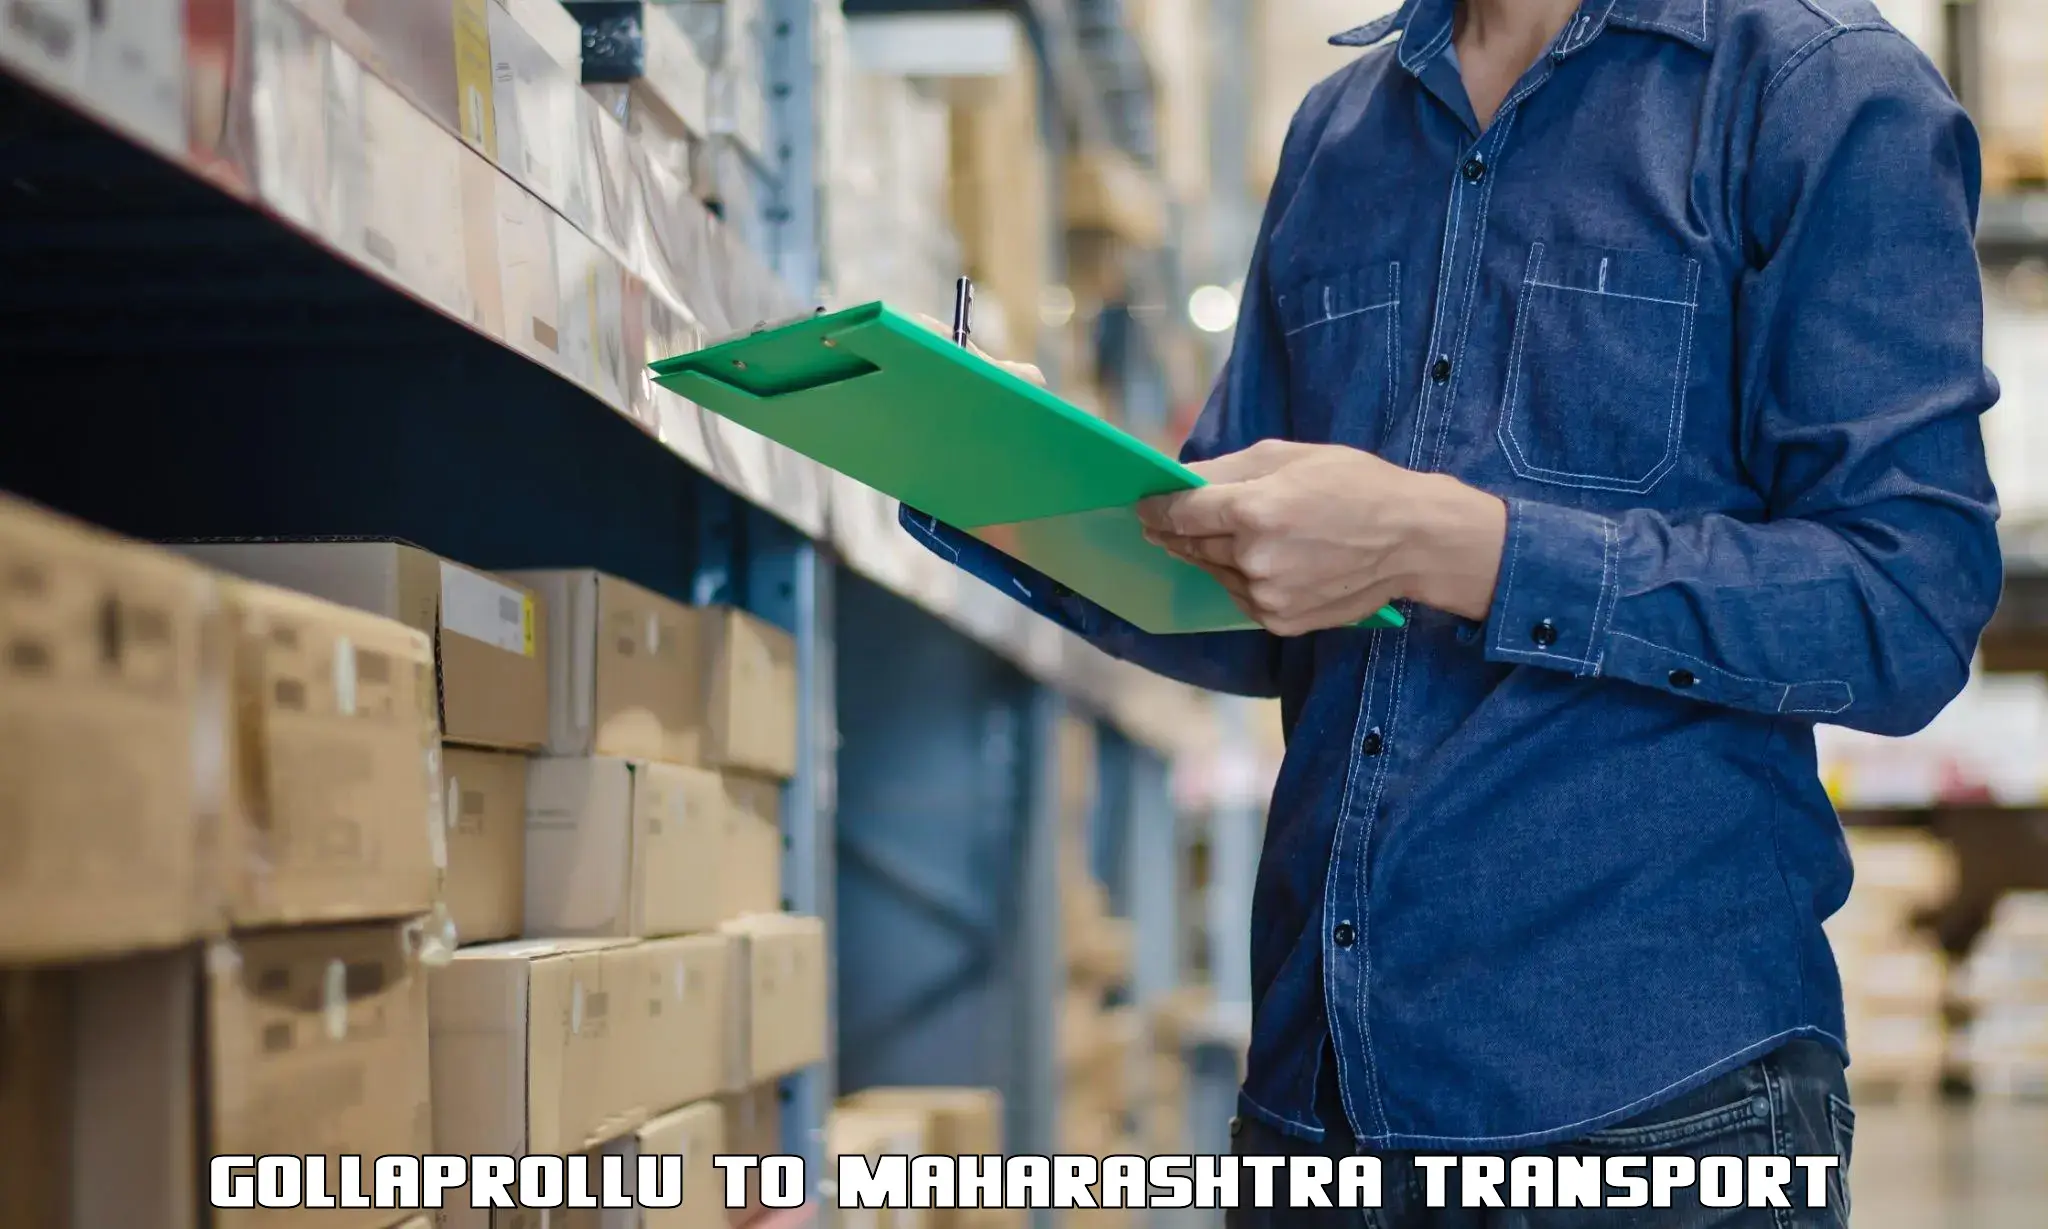 Package delivery services Gollaprollu to Rashiwade